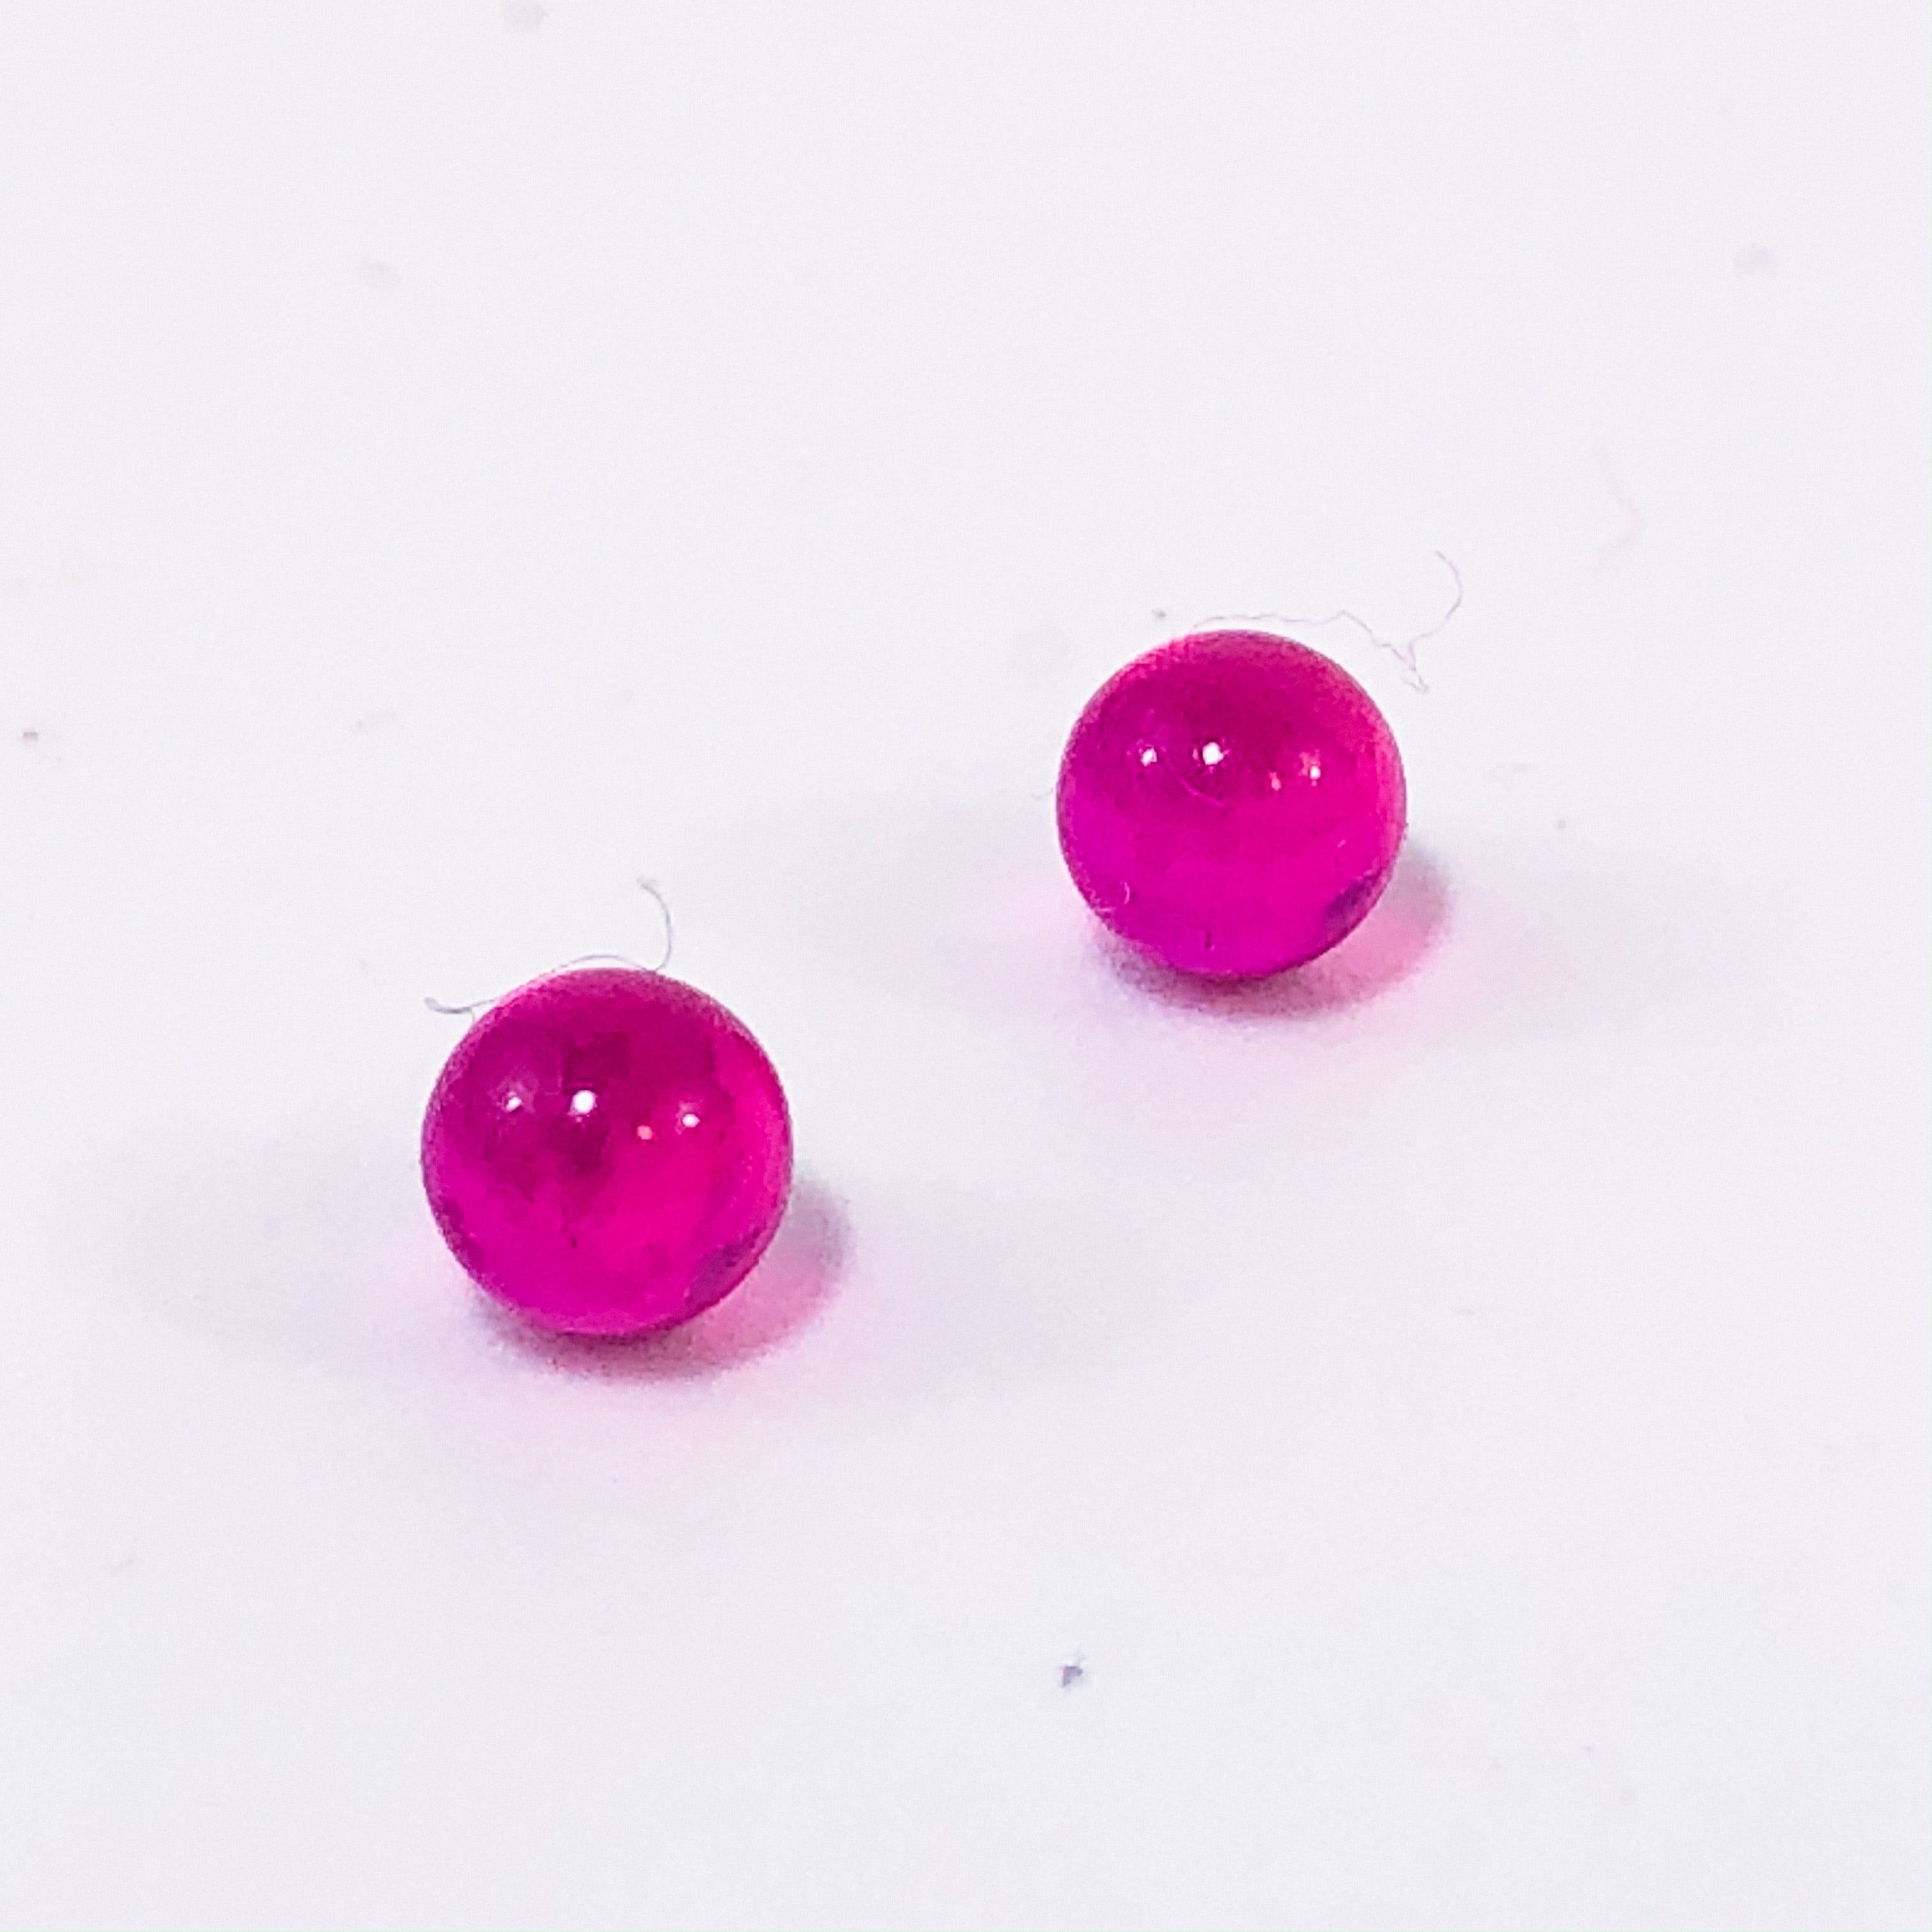 Real Ruby Dab Beads - pair of 2